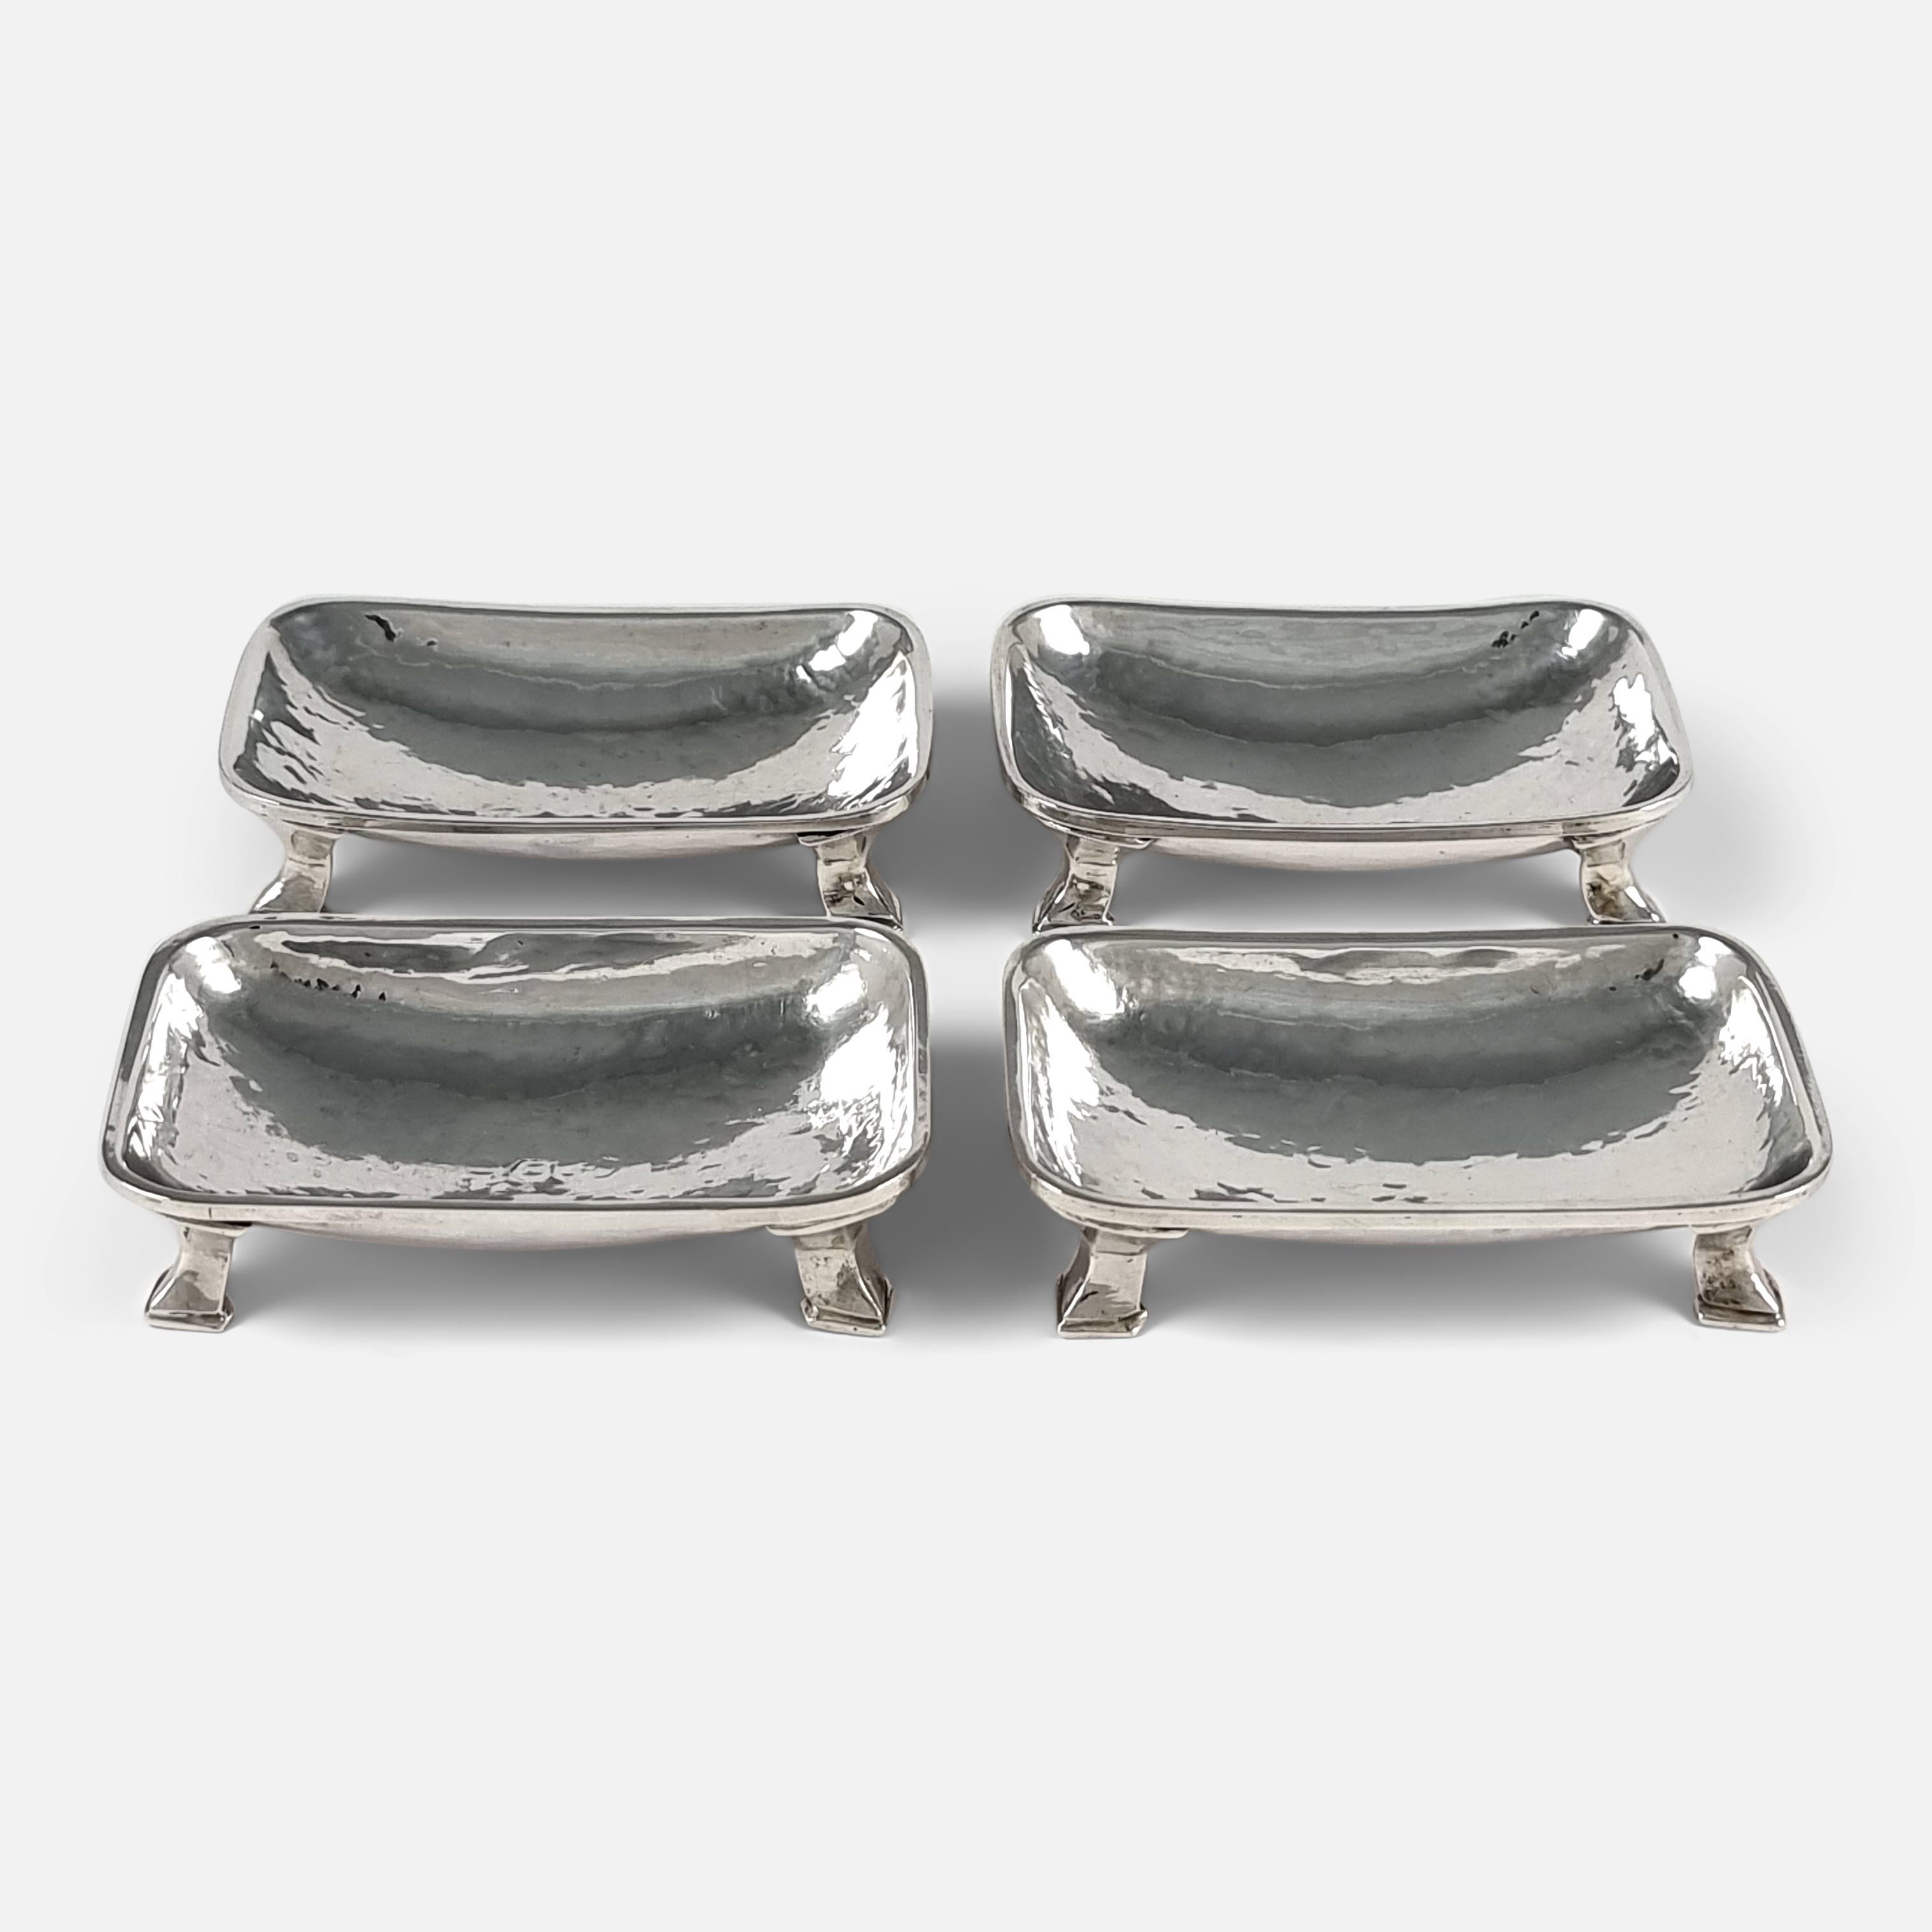 Set of 4 Arts and Crafts Silver Salts, Omar Ramsden, 1935 For Sale 11